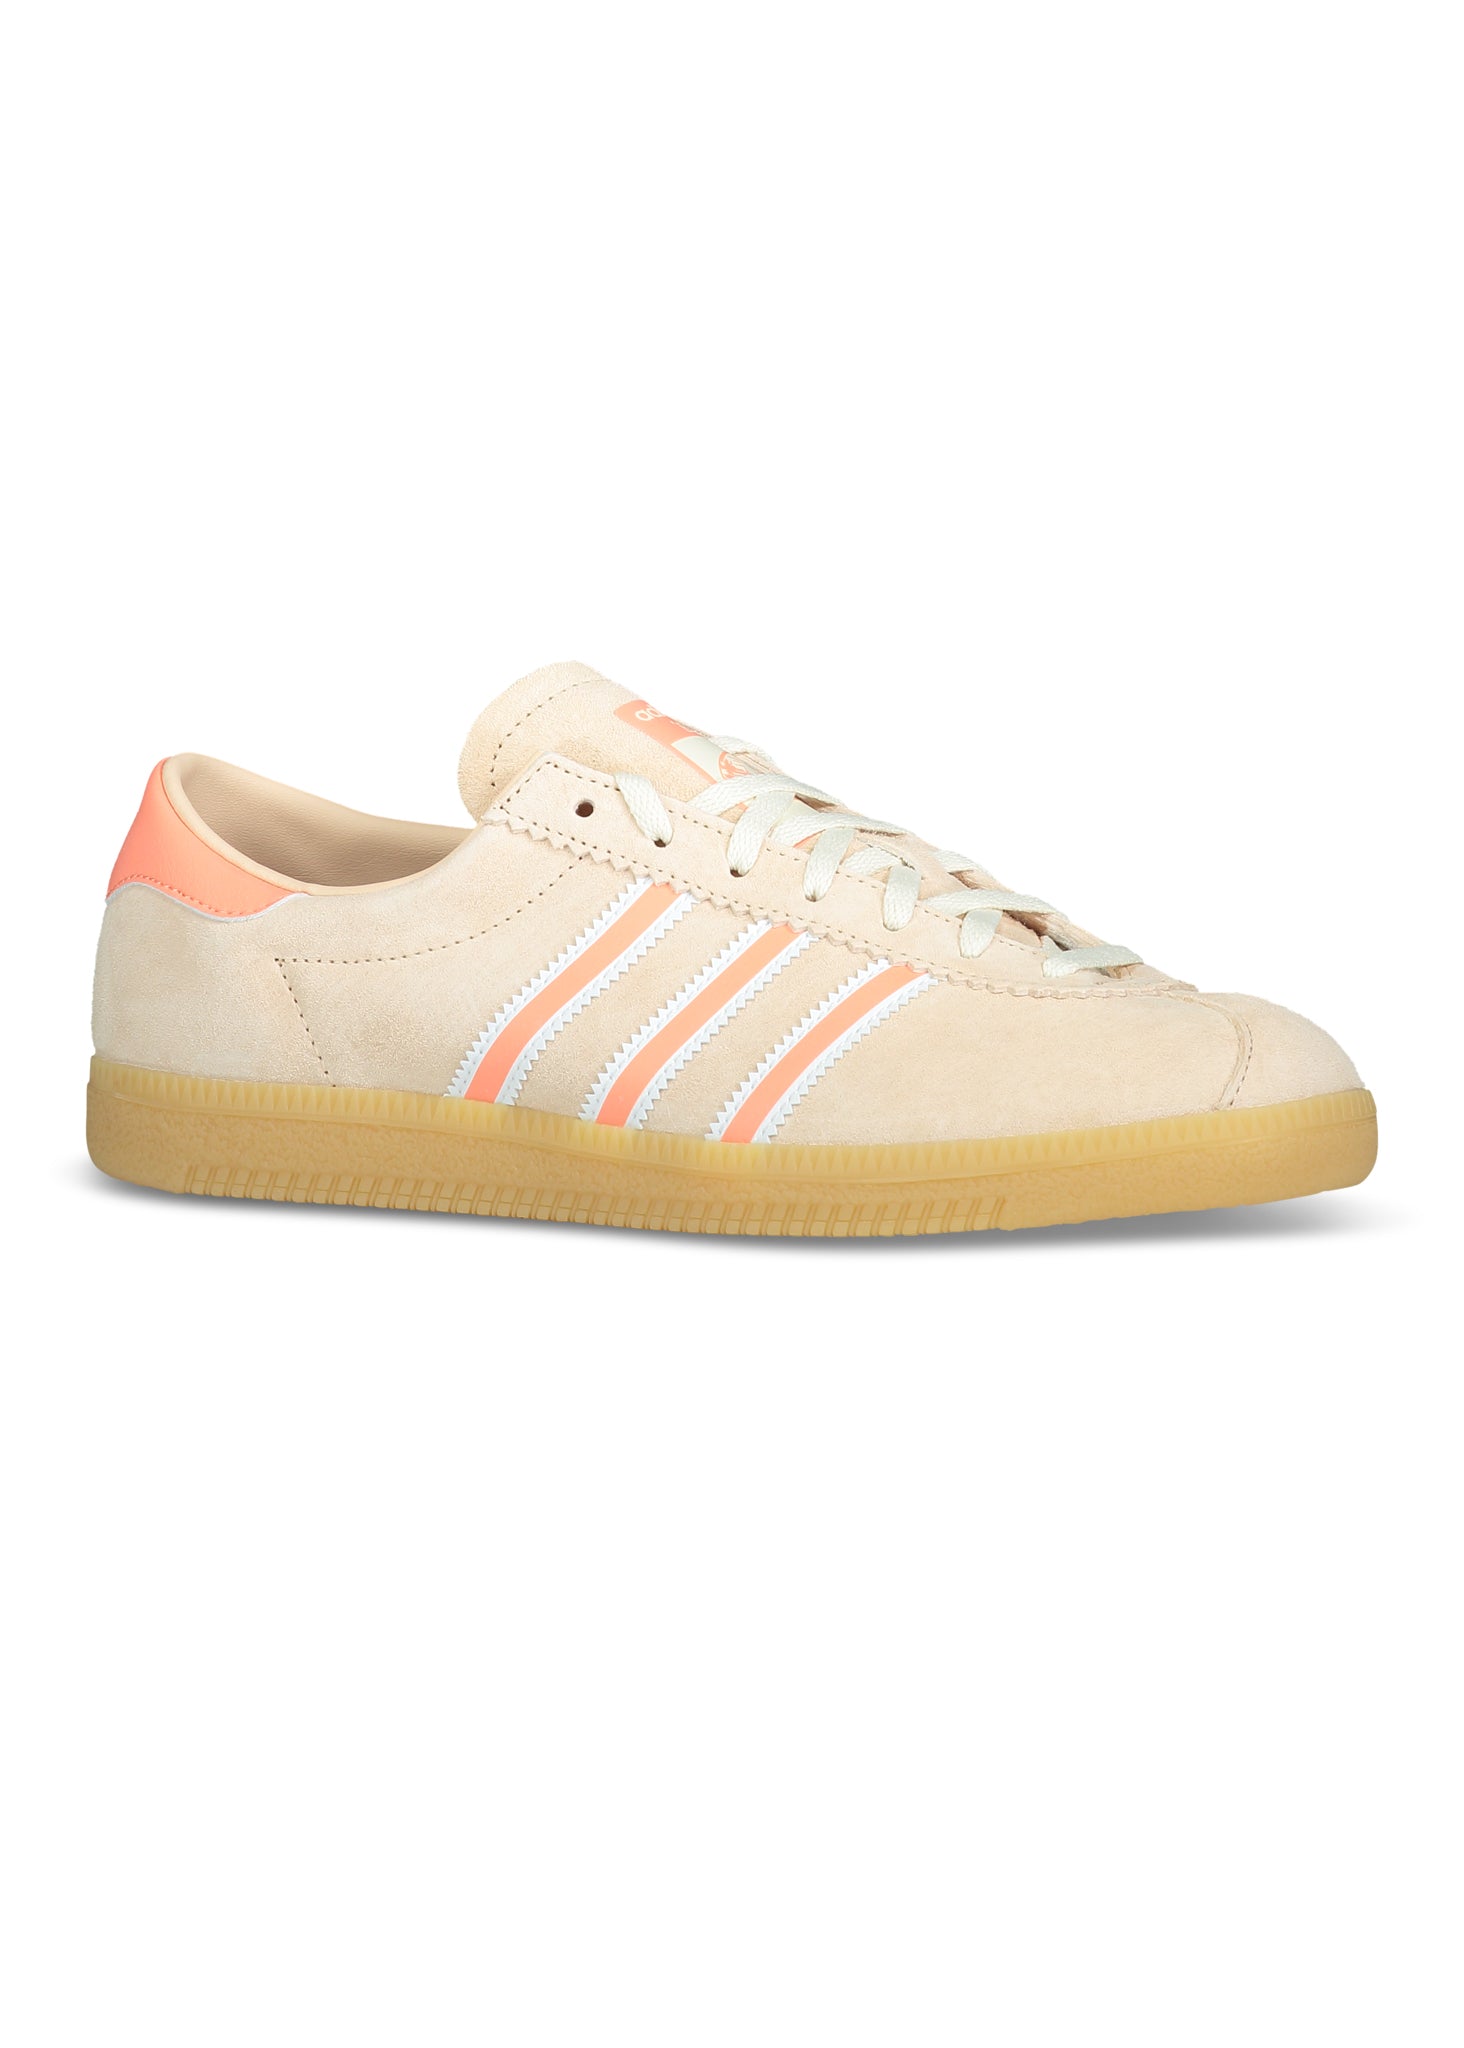 Adidas State Series MA - Corfus